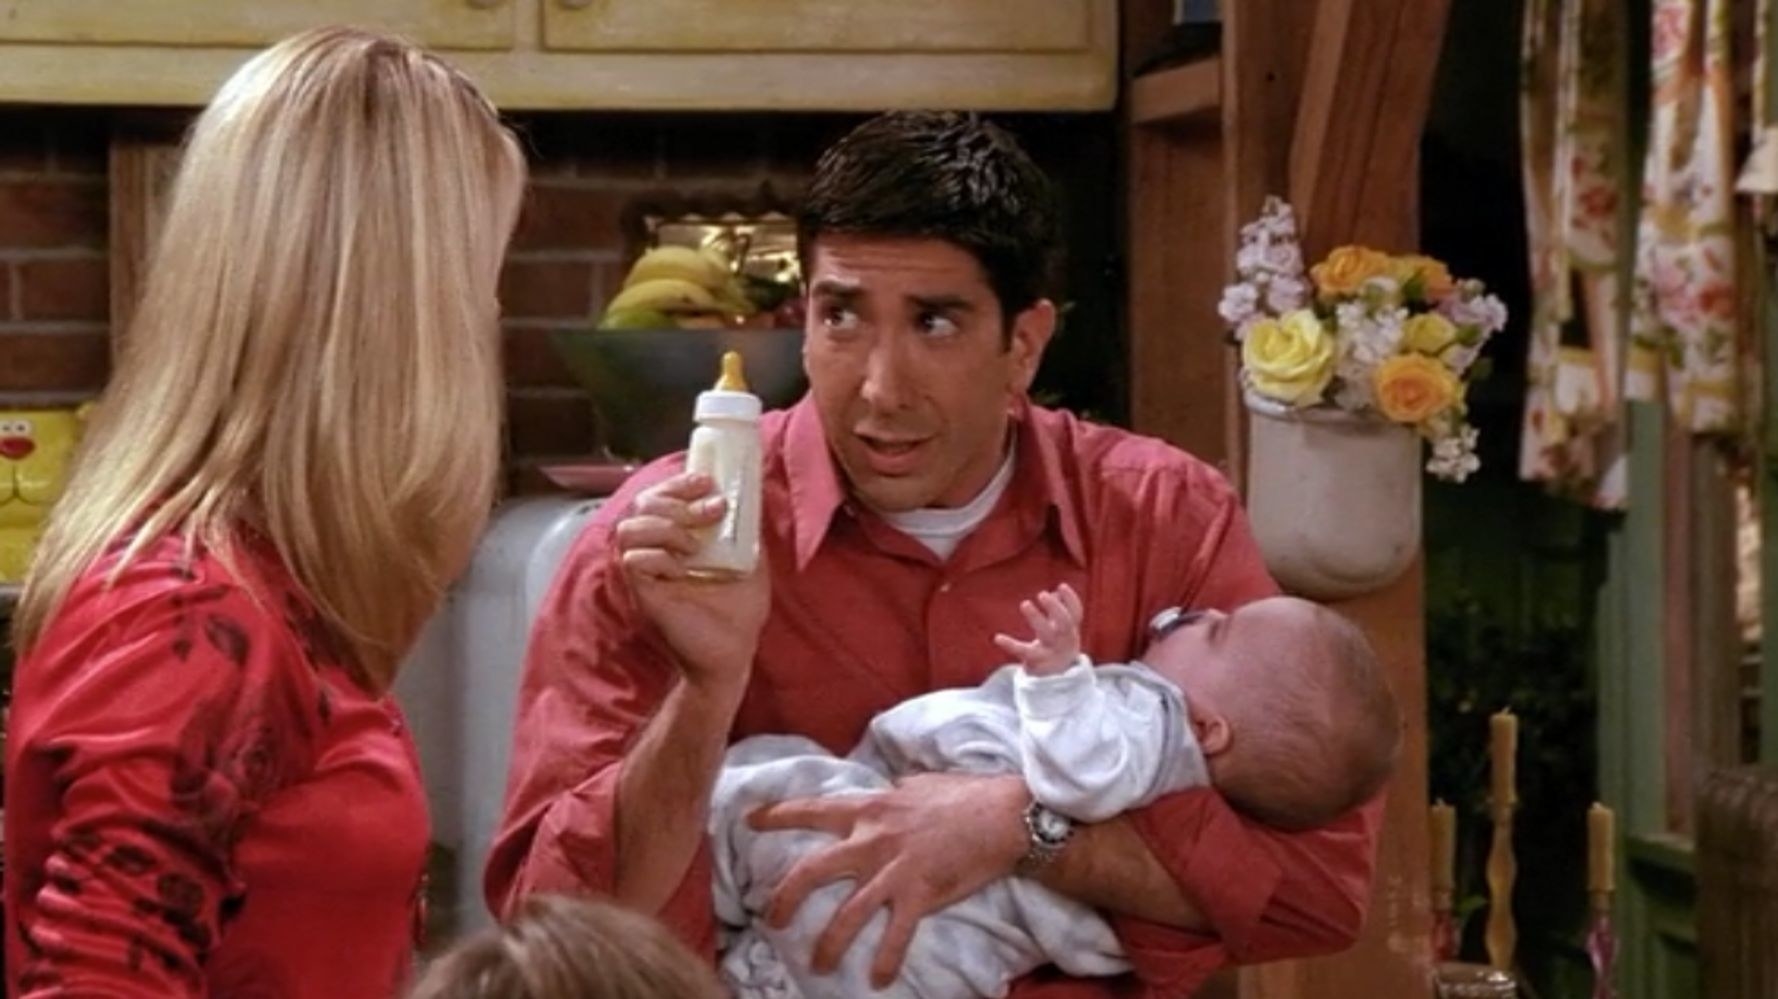 Ross from &quot;Friends&quot; holding a baby and bottle.